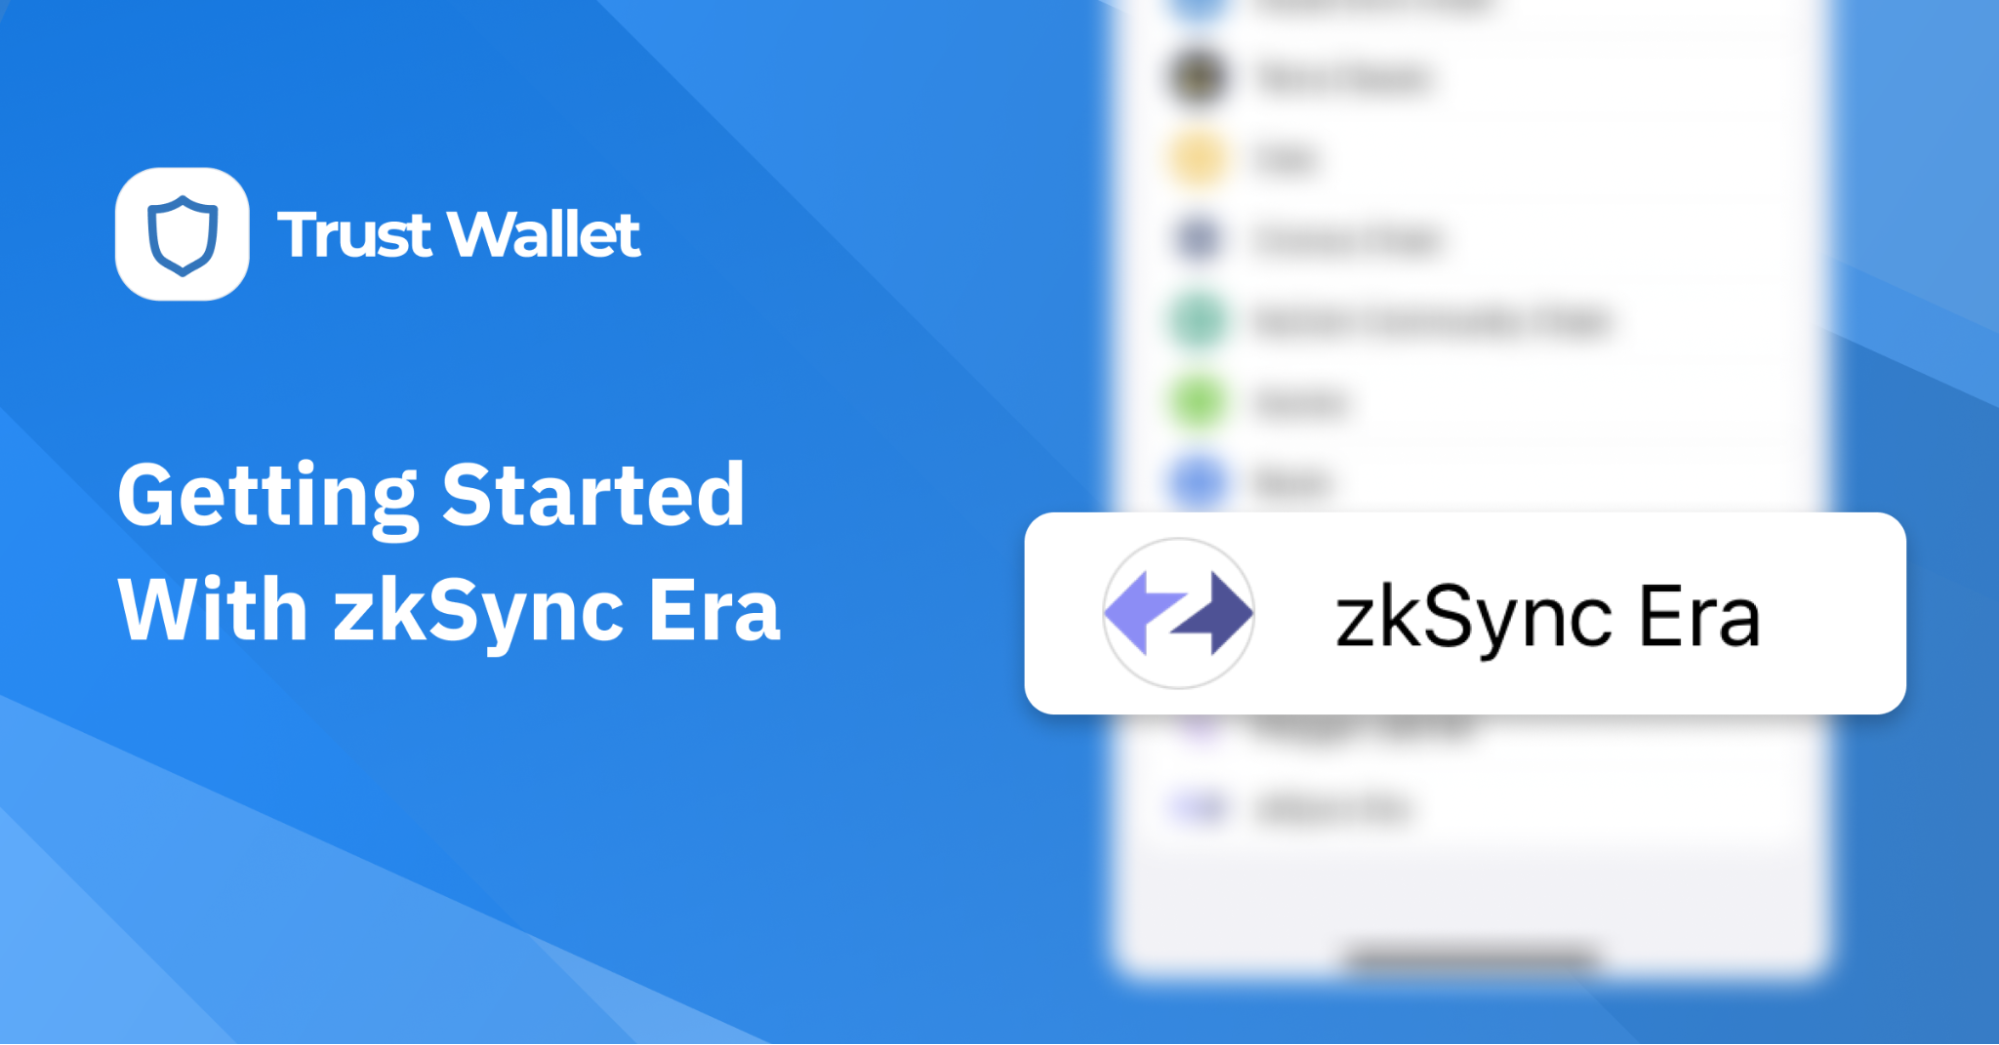 zkSync Era: Everything You Need to Know to Get Started